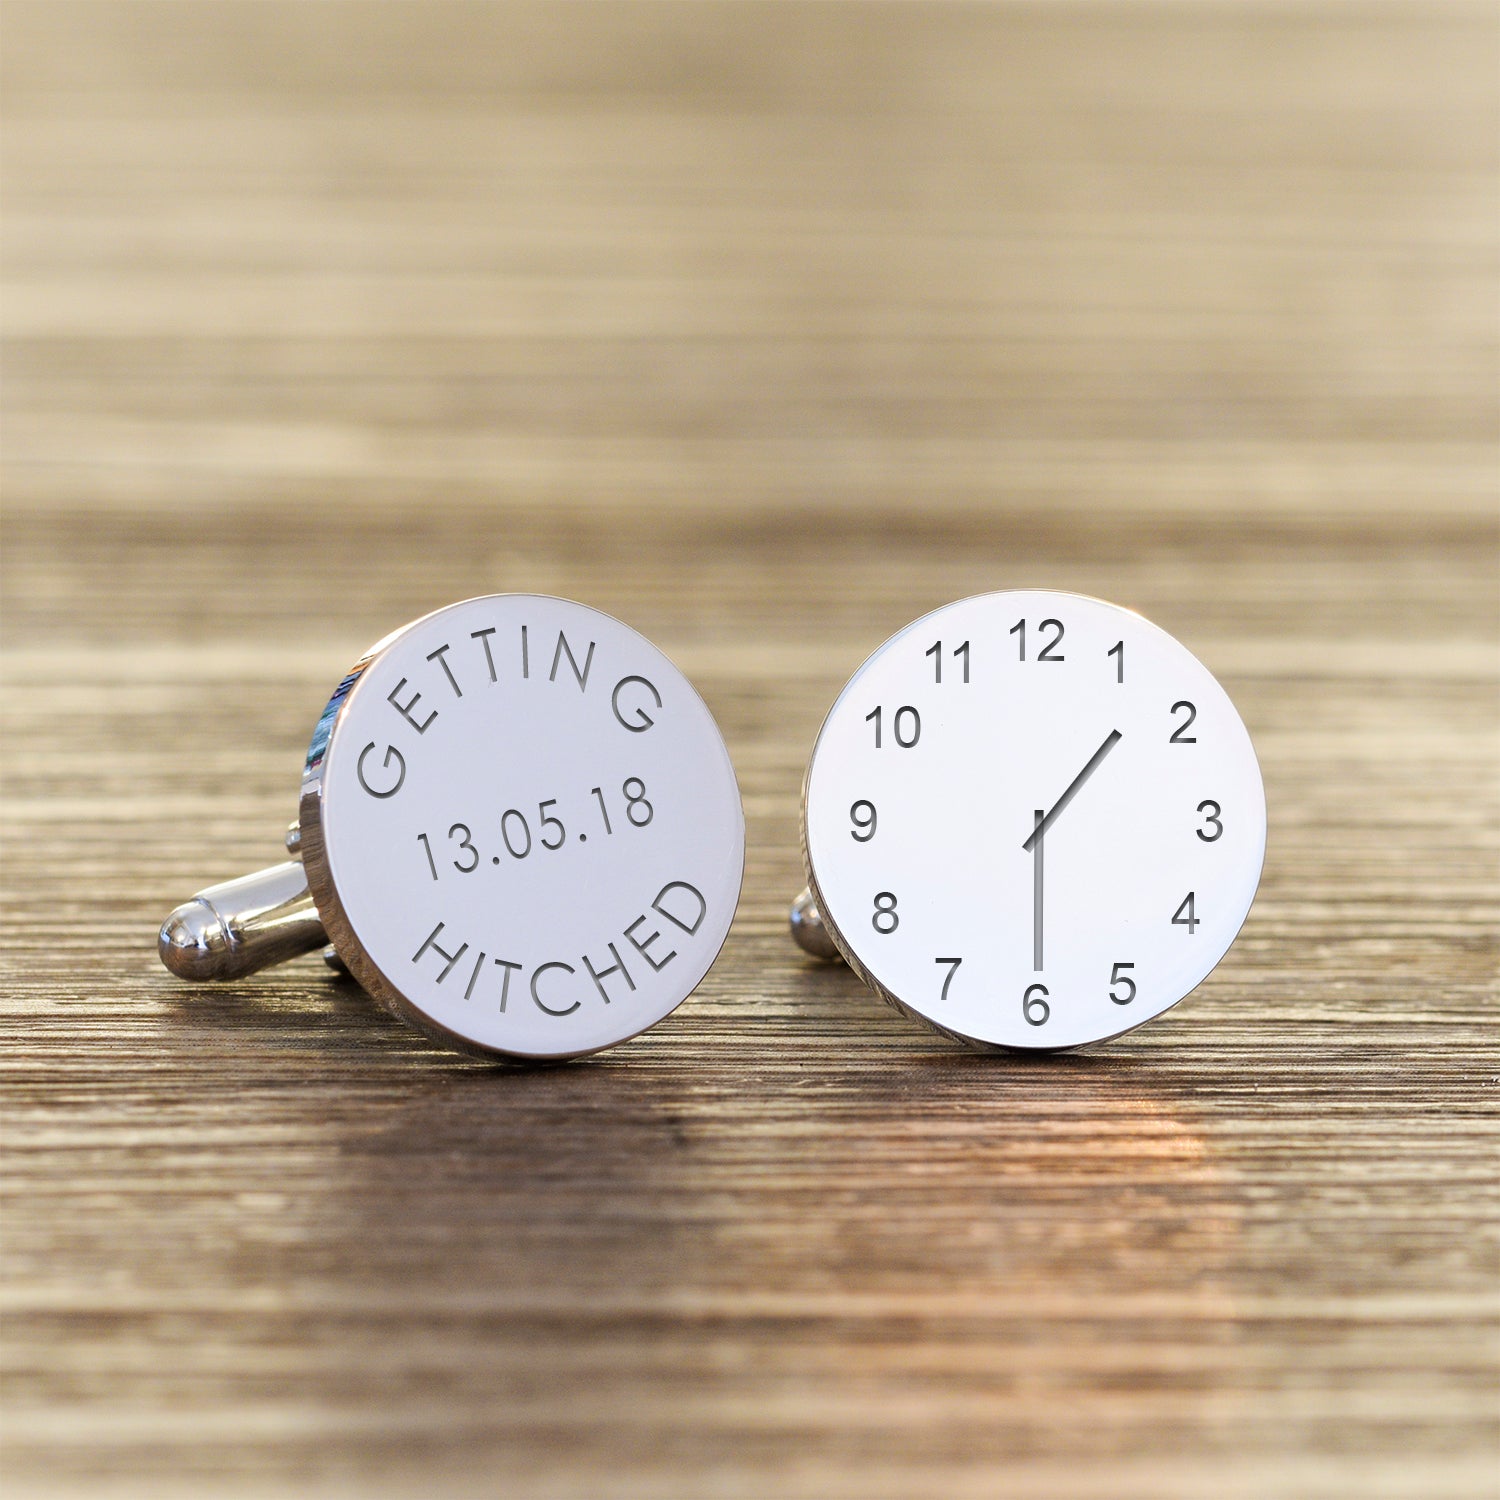 Personalised Getting Hitched With Time Cufflinks